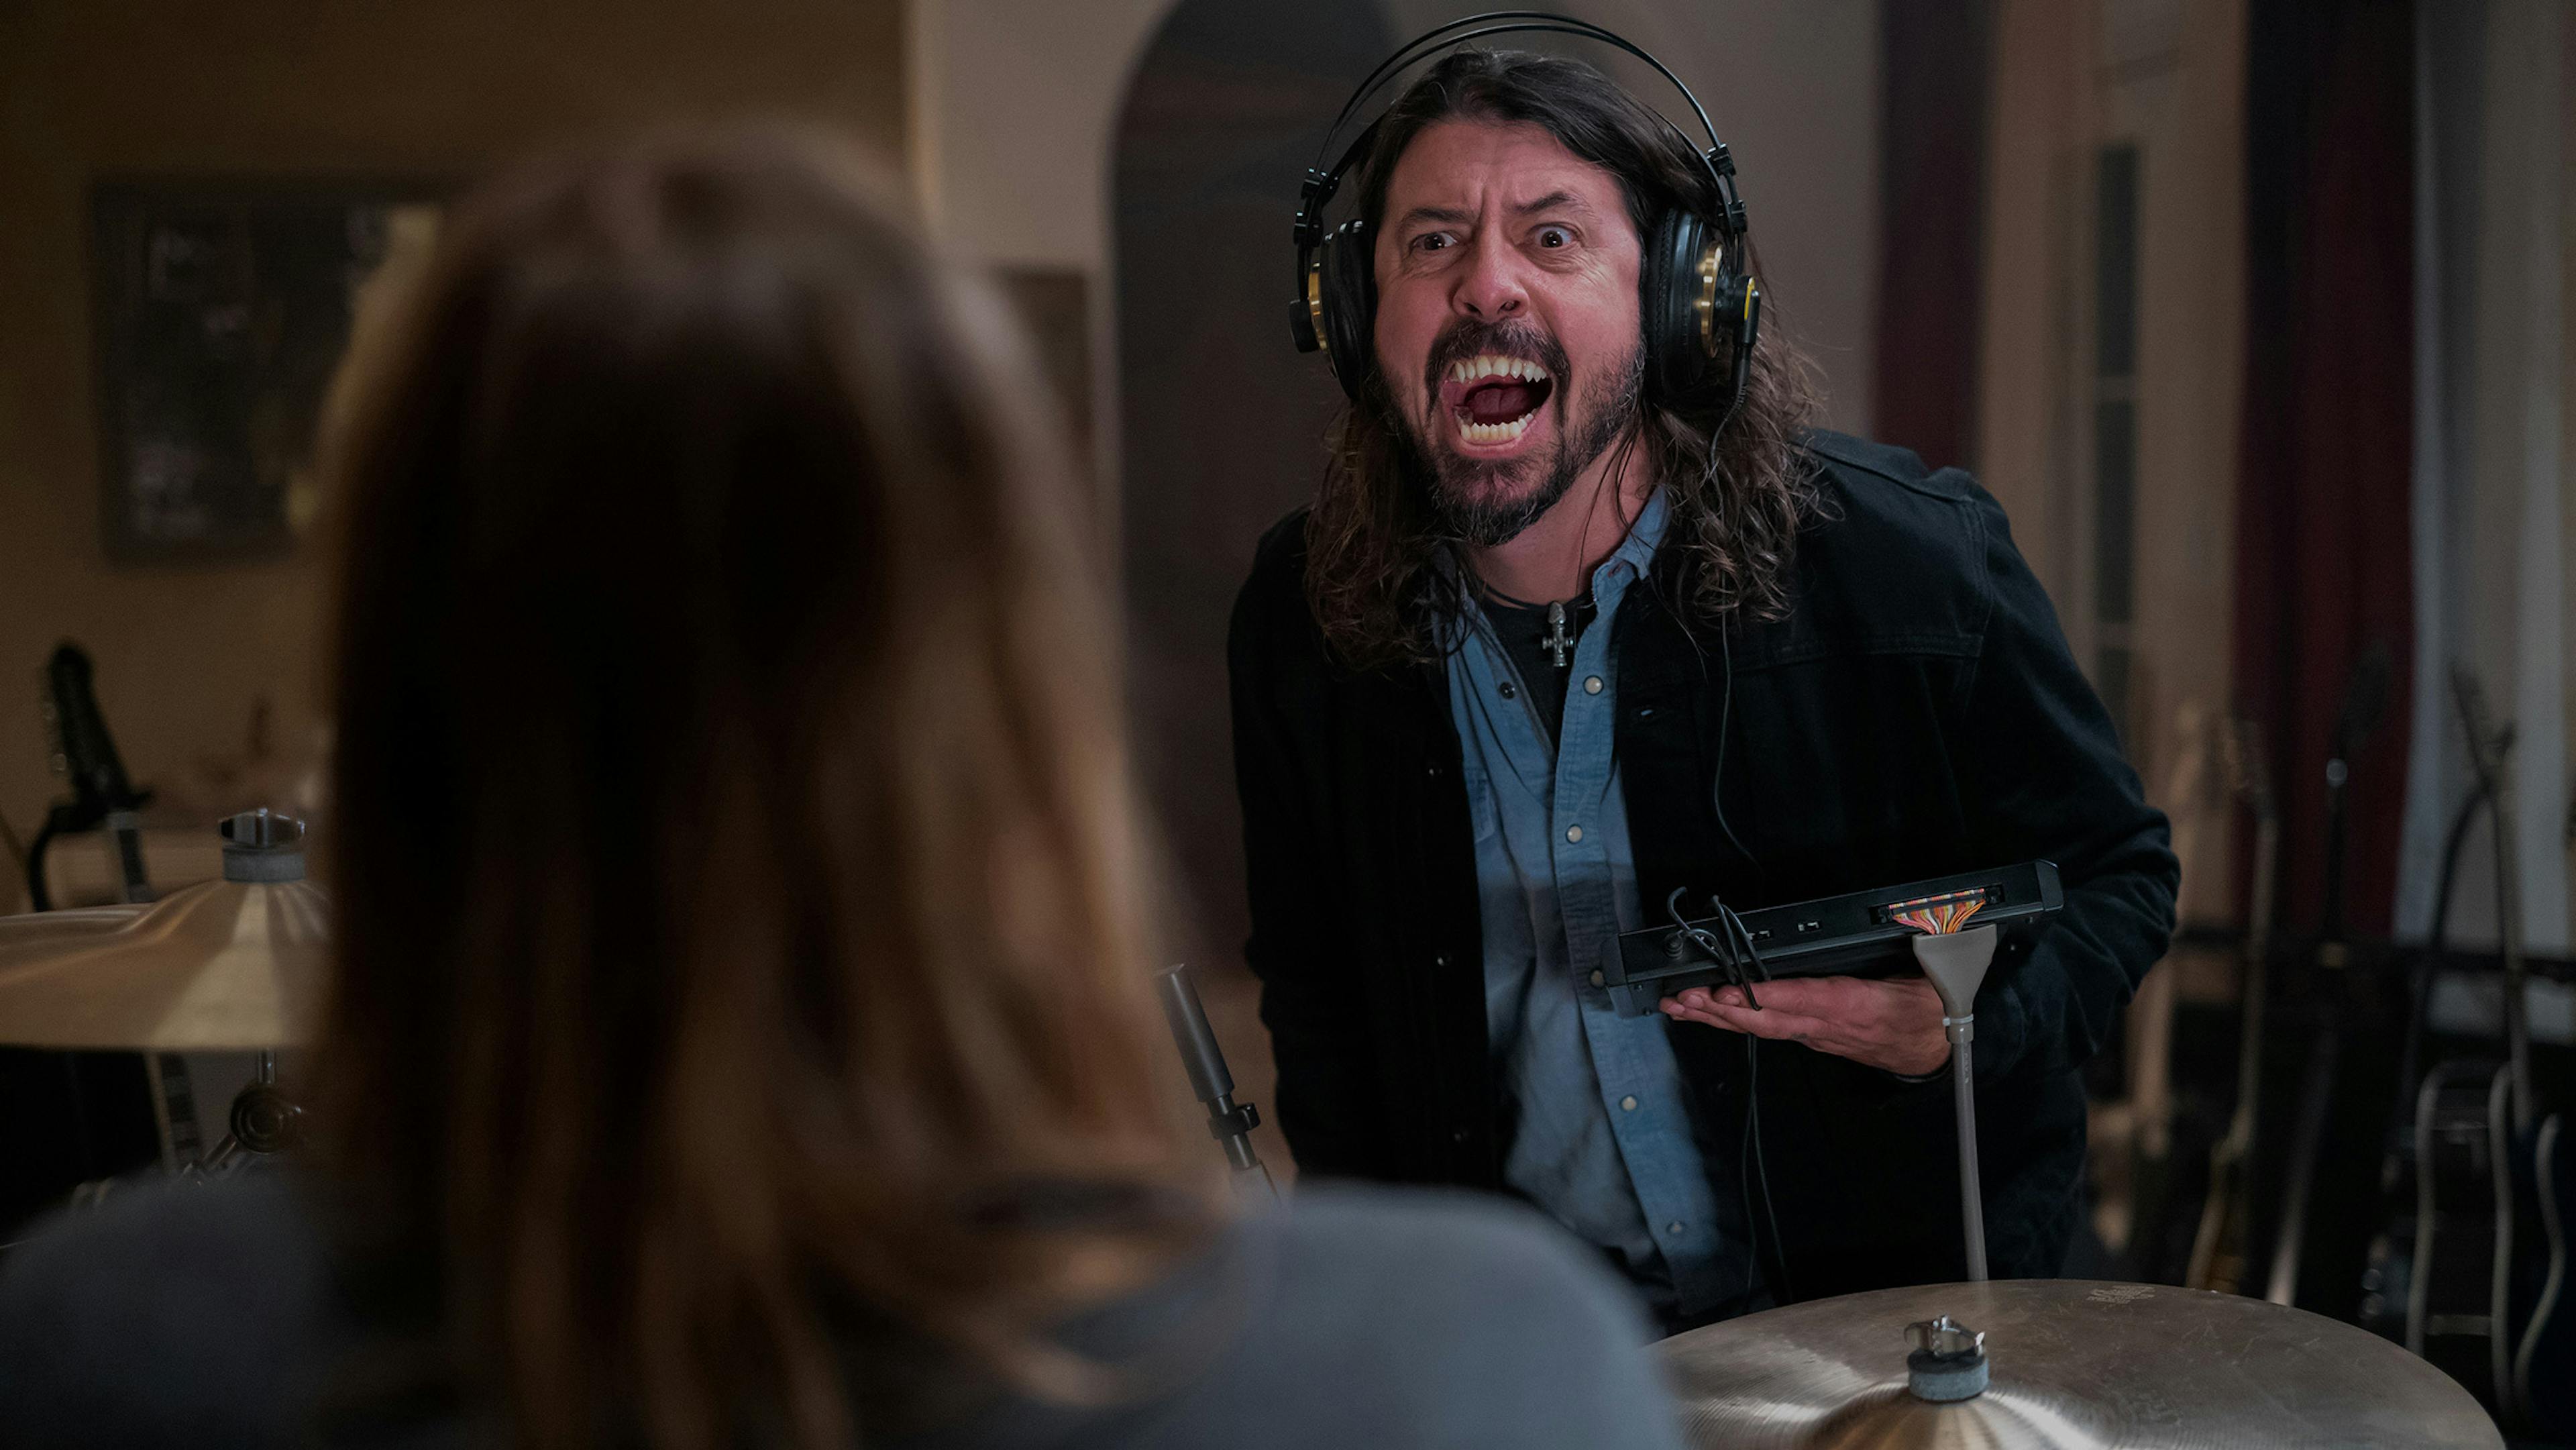 Dave Grohl: “You really have to let your guard down and show everybody your true dork”